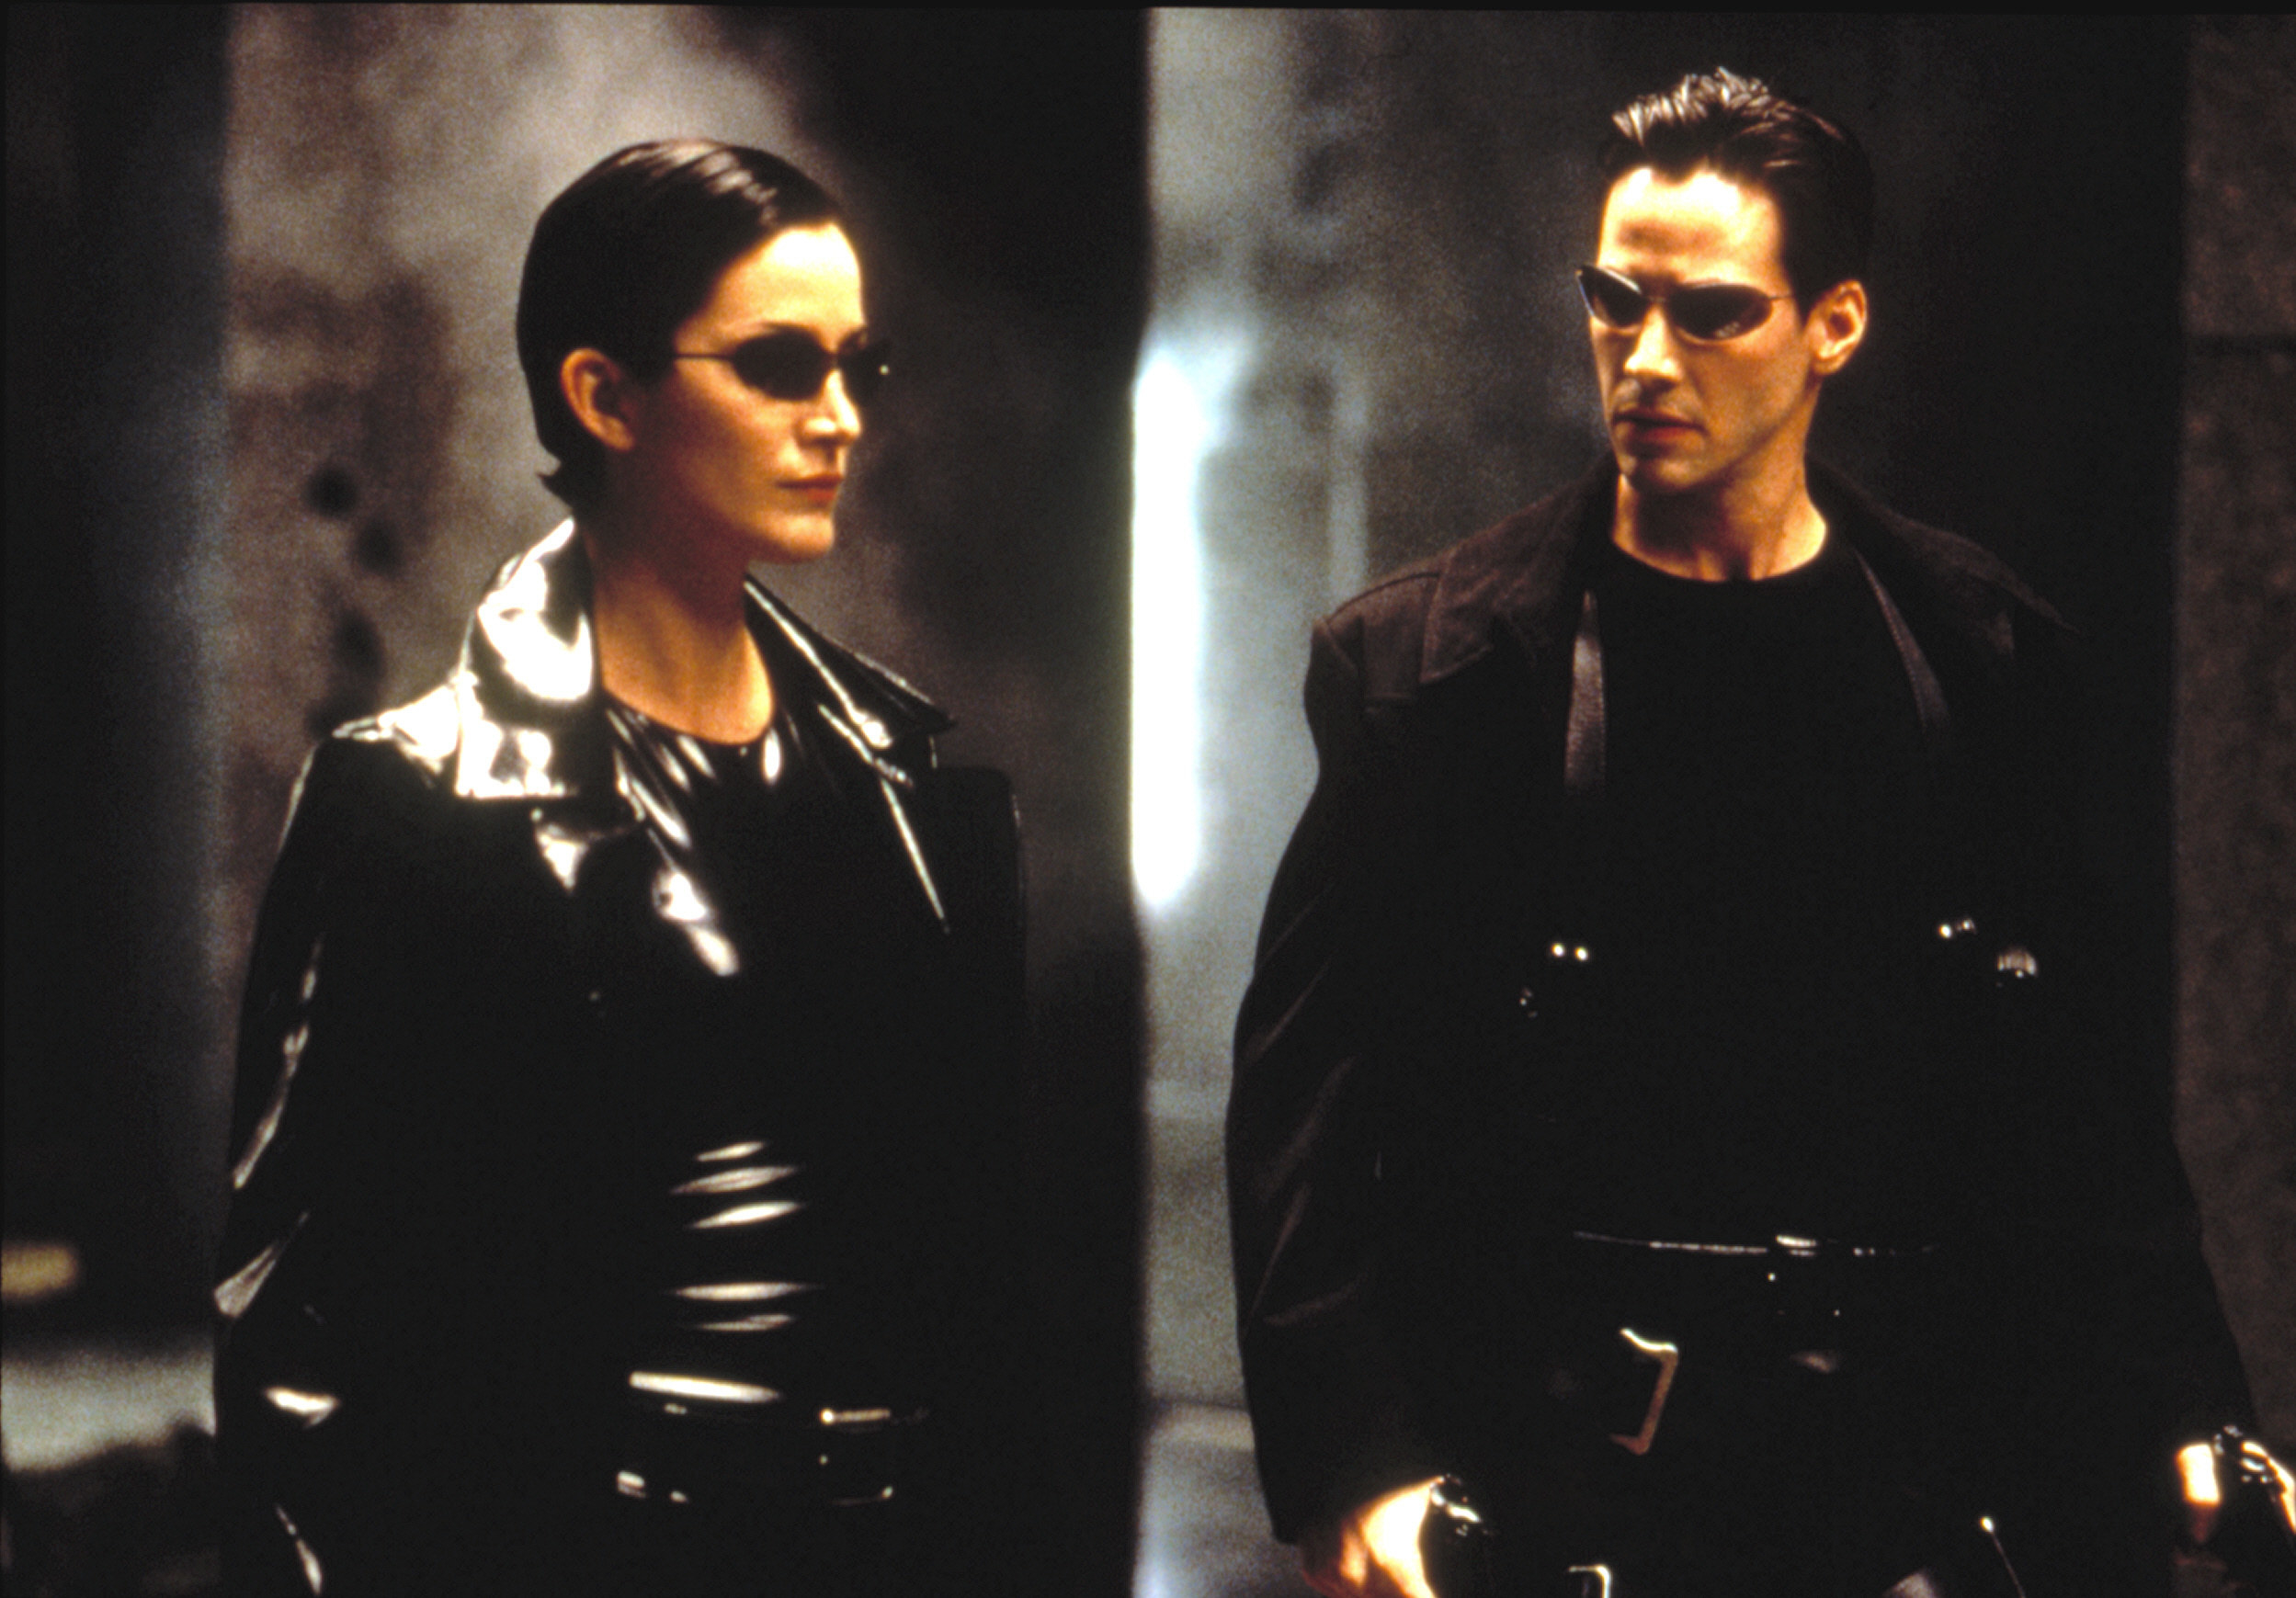 A man and a woman both dressed in black